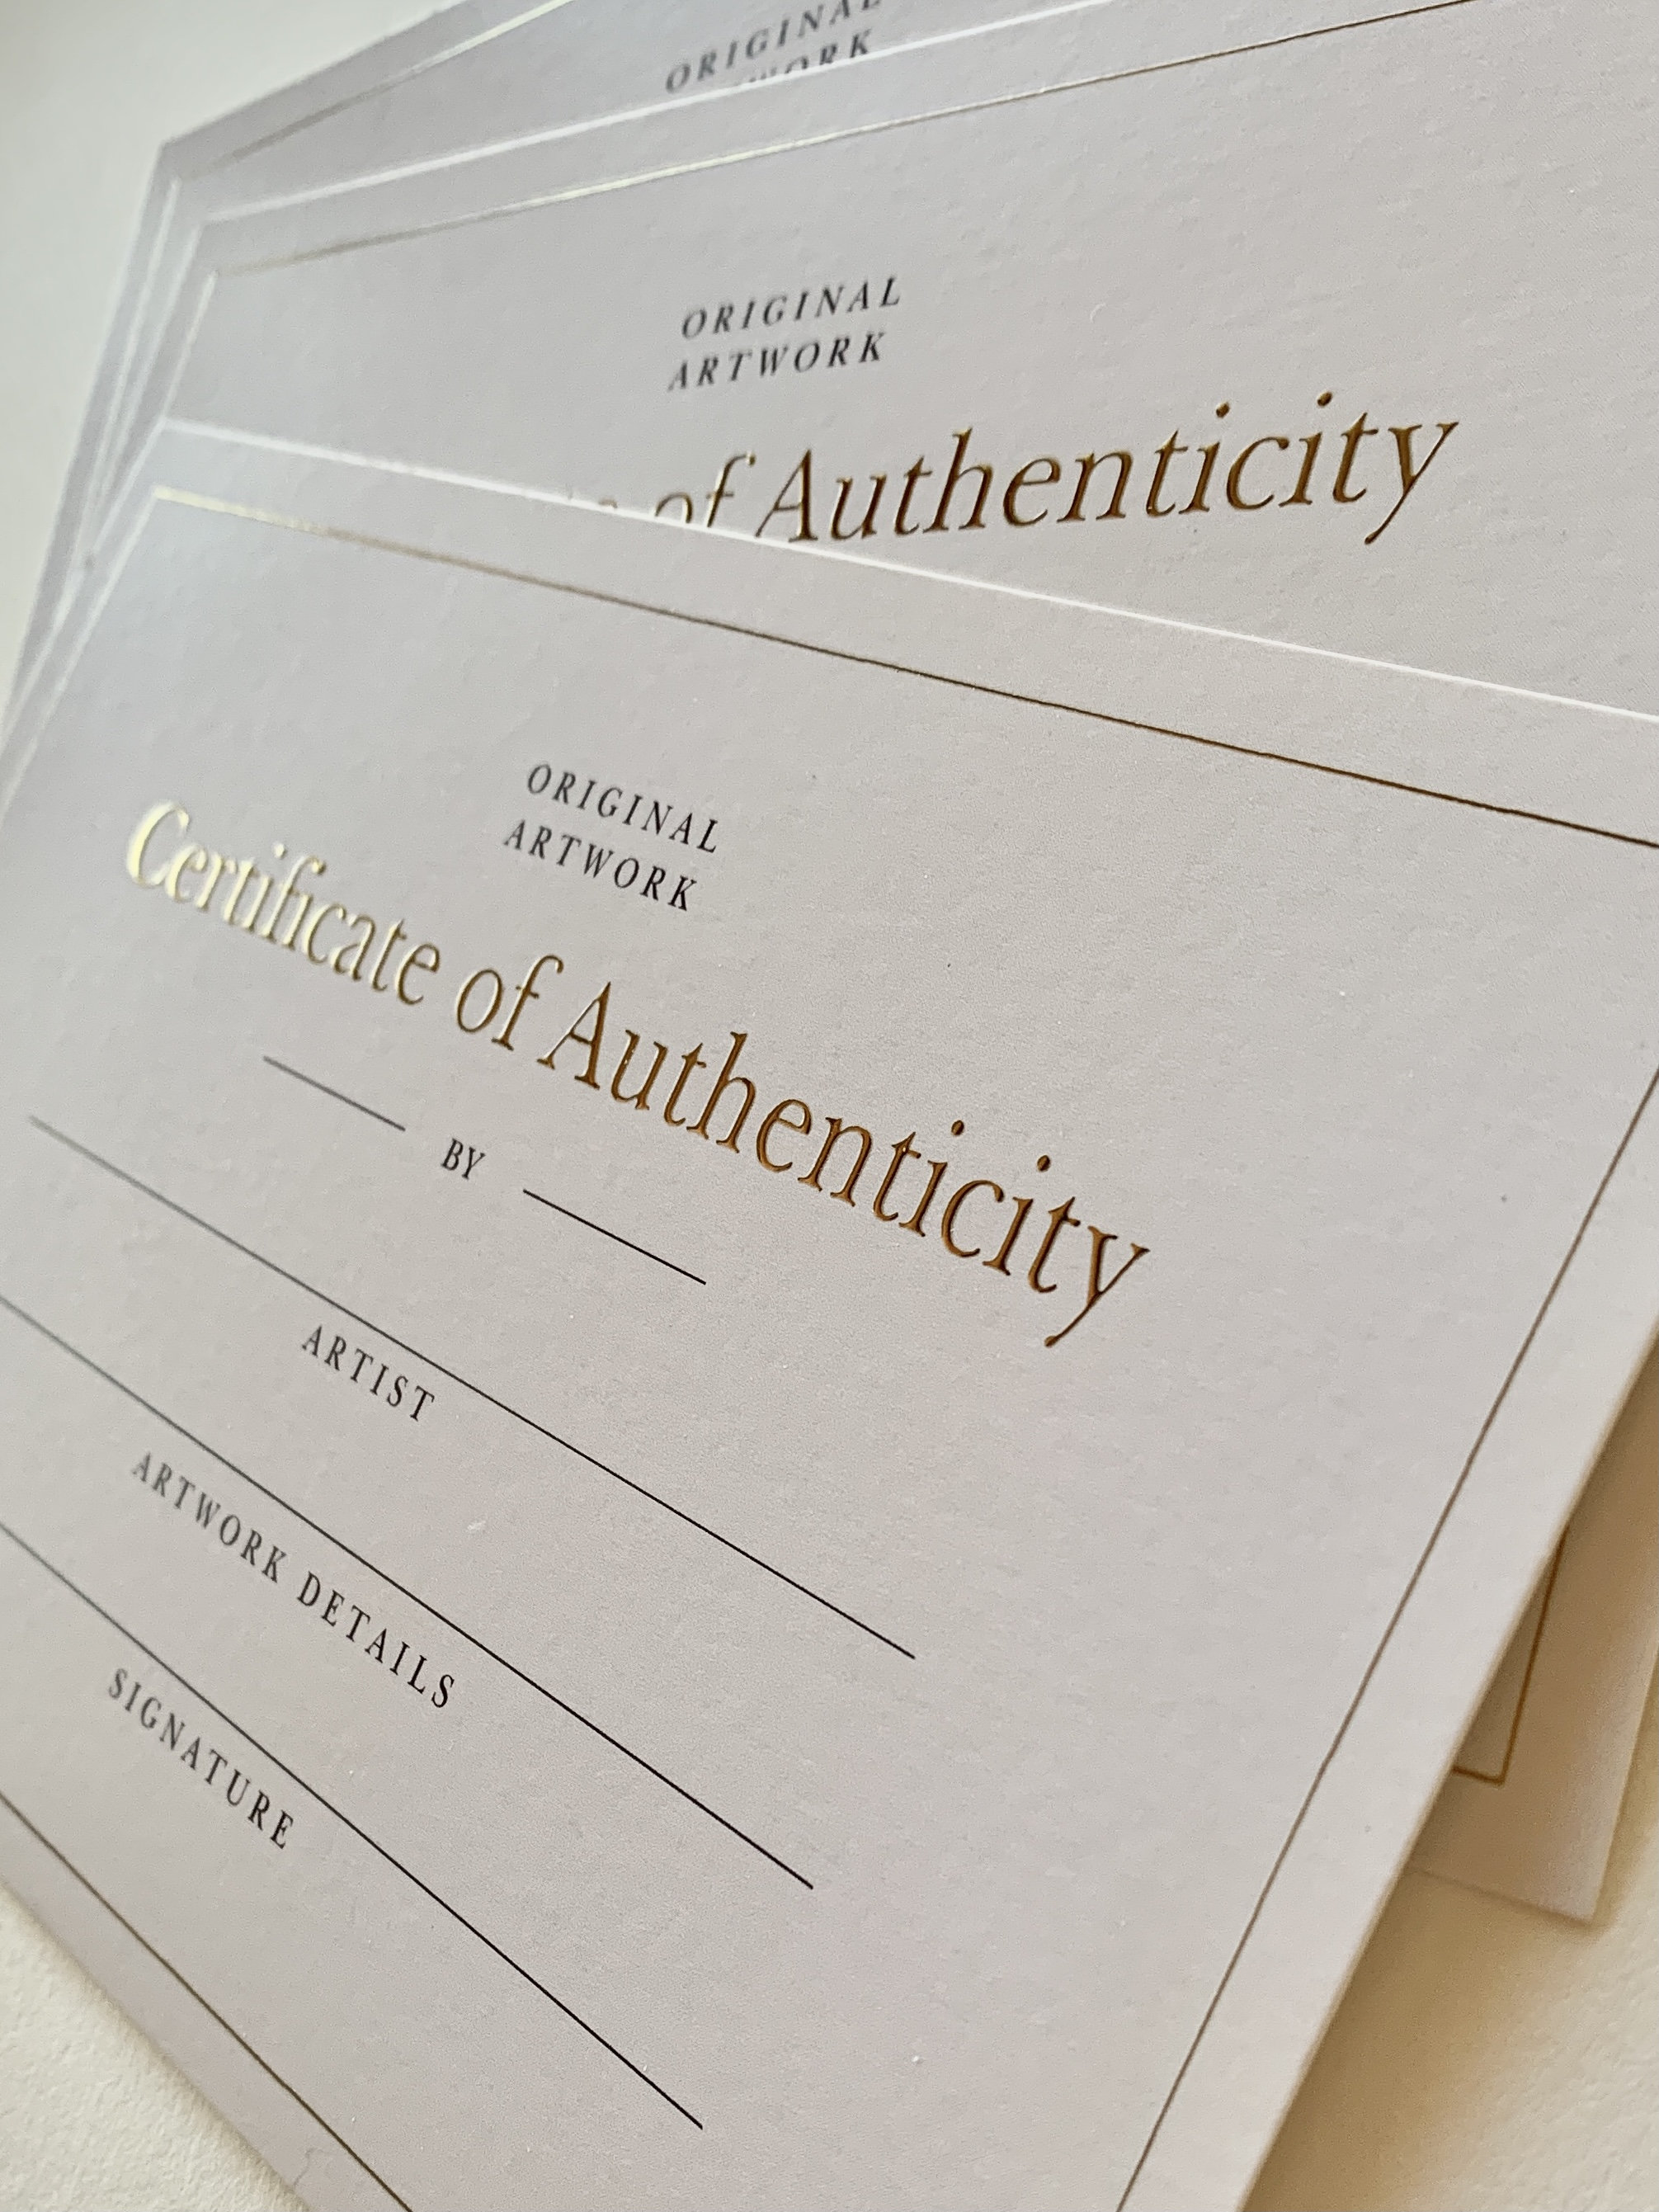 Certificate of authenticity card, artwork, jewelry, business certificate,  business stationery, eco friendly business card